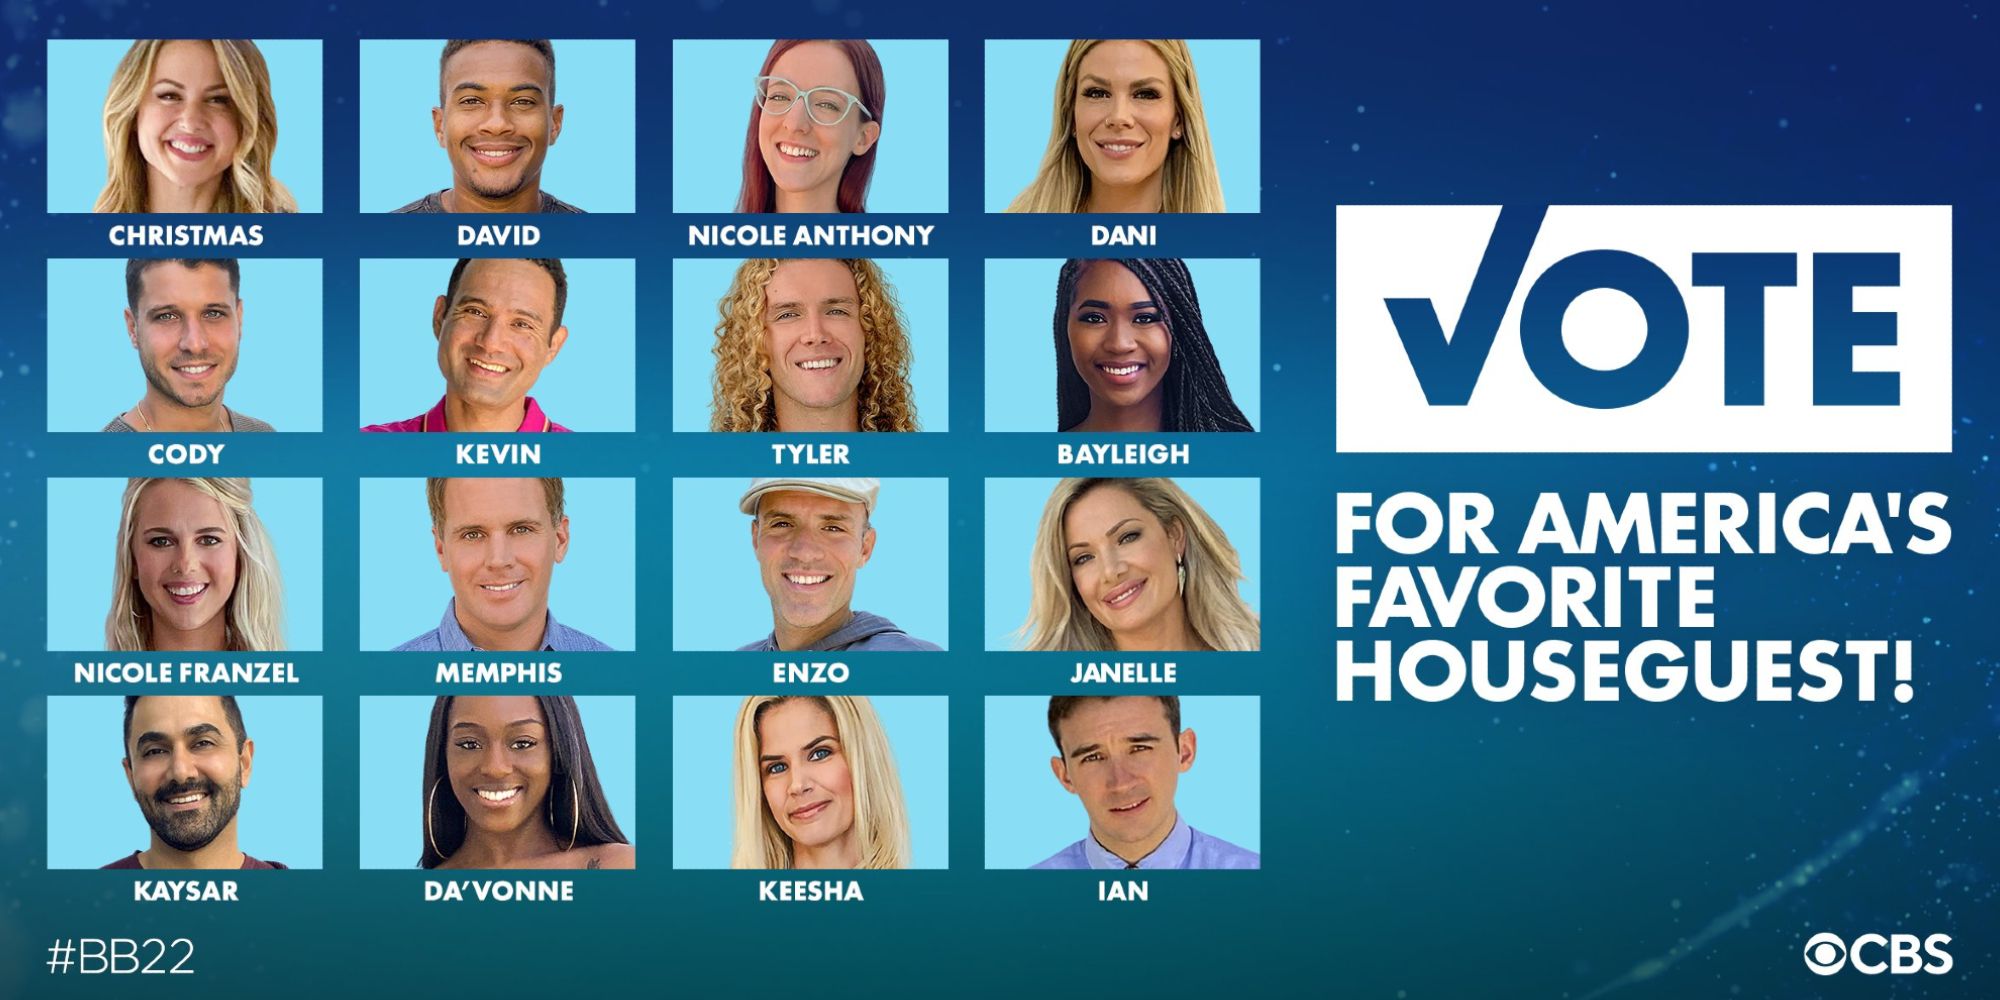 Meet The 16 Finalists Of US Big Brother All Stars & The Winner That